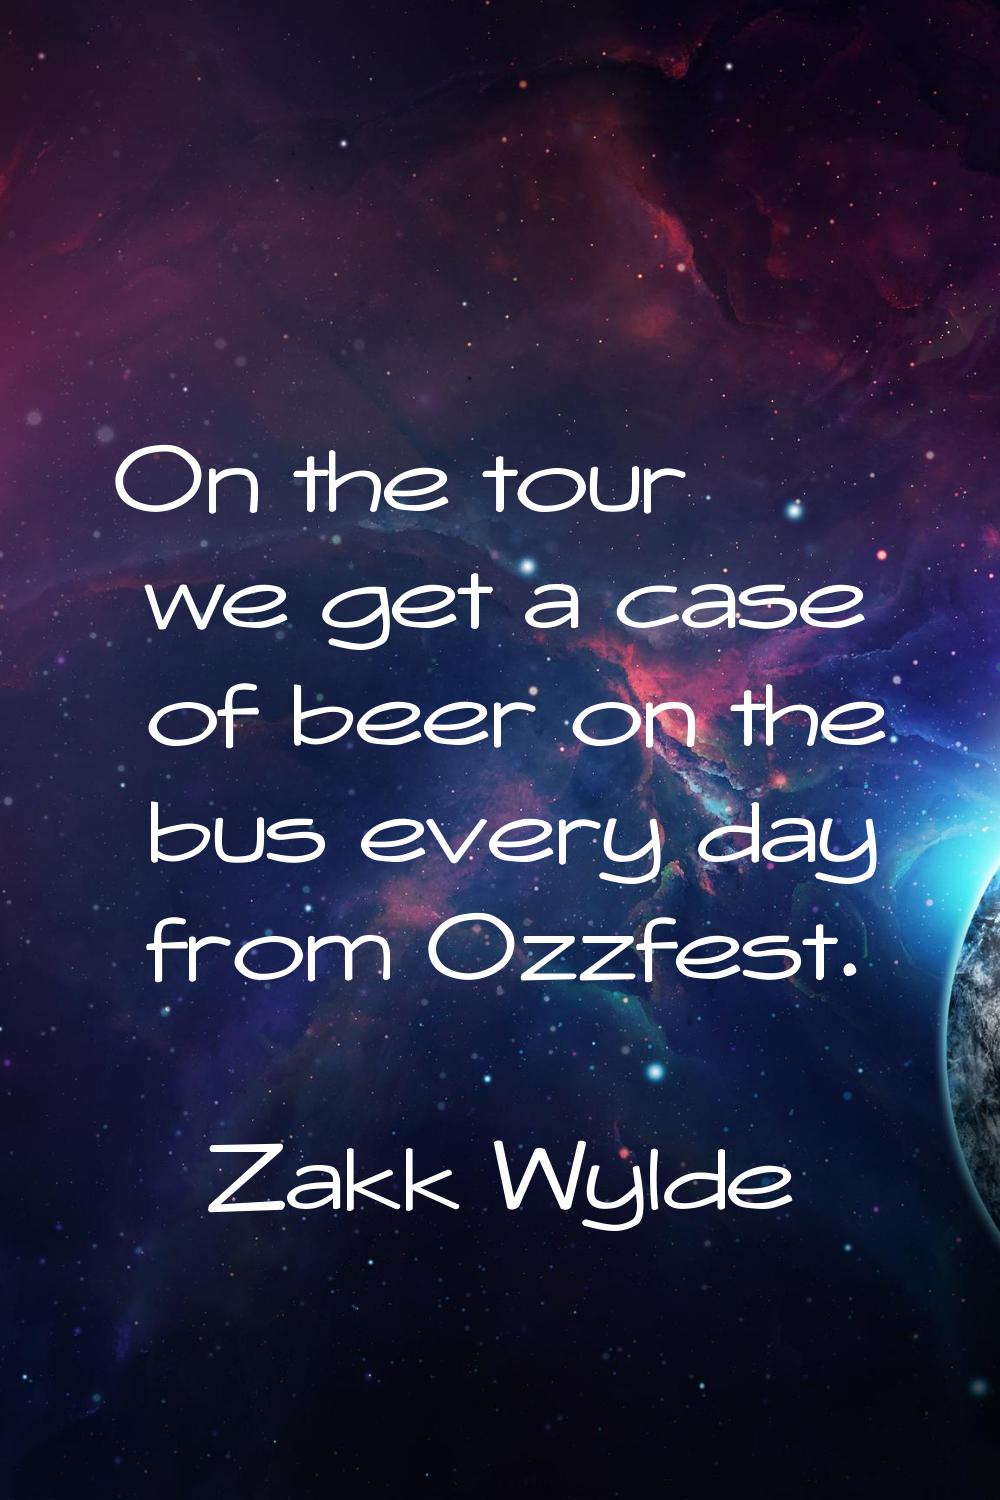 On the tour we get a case of beer on the bus every day from Ozzfest.